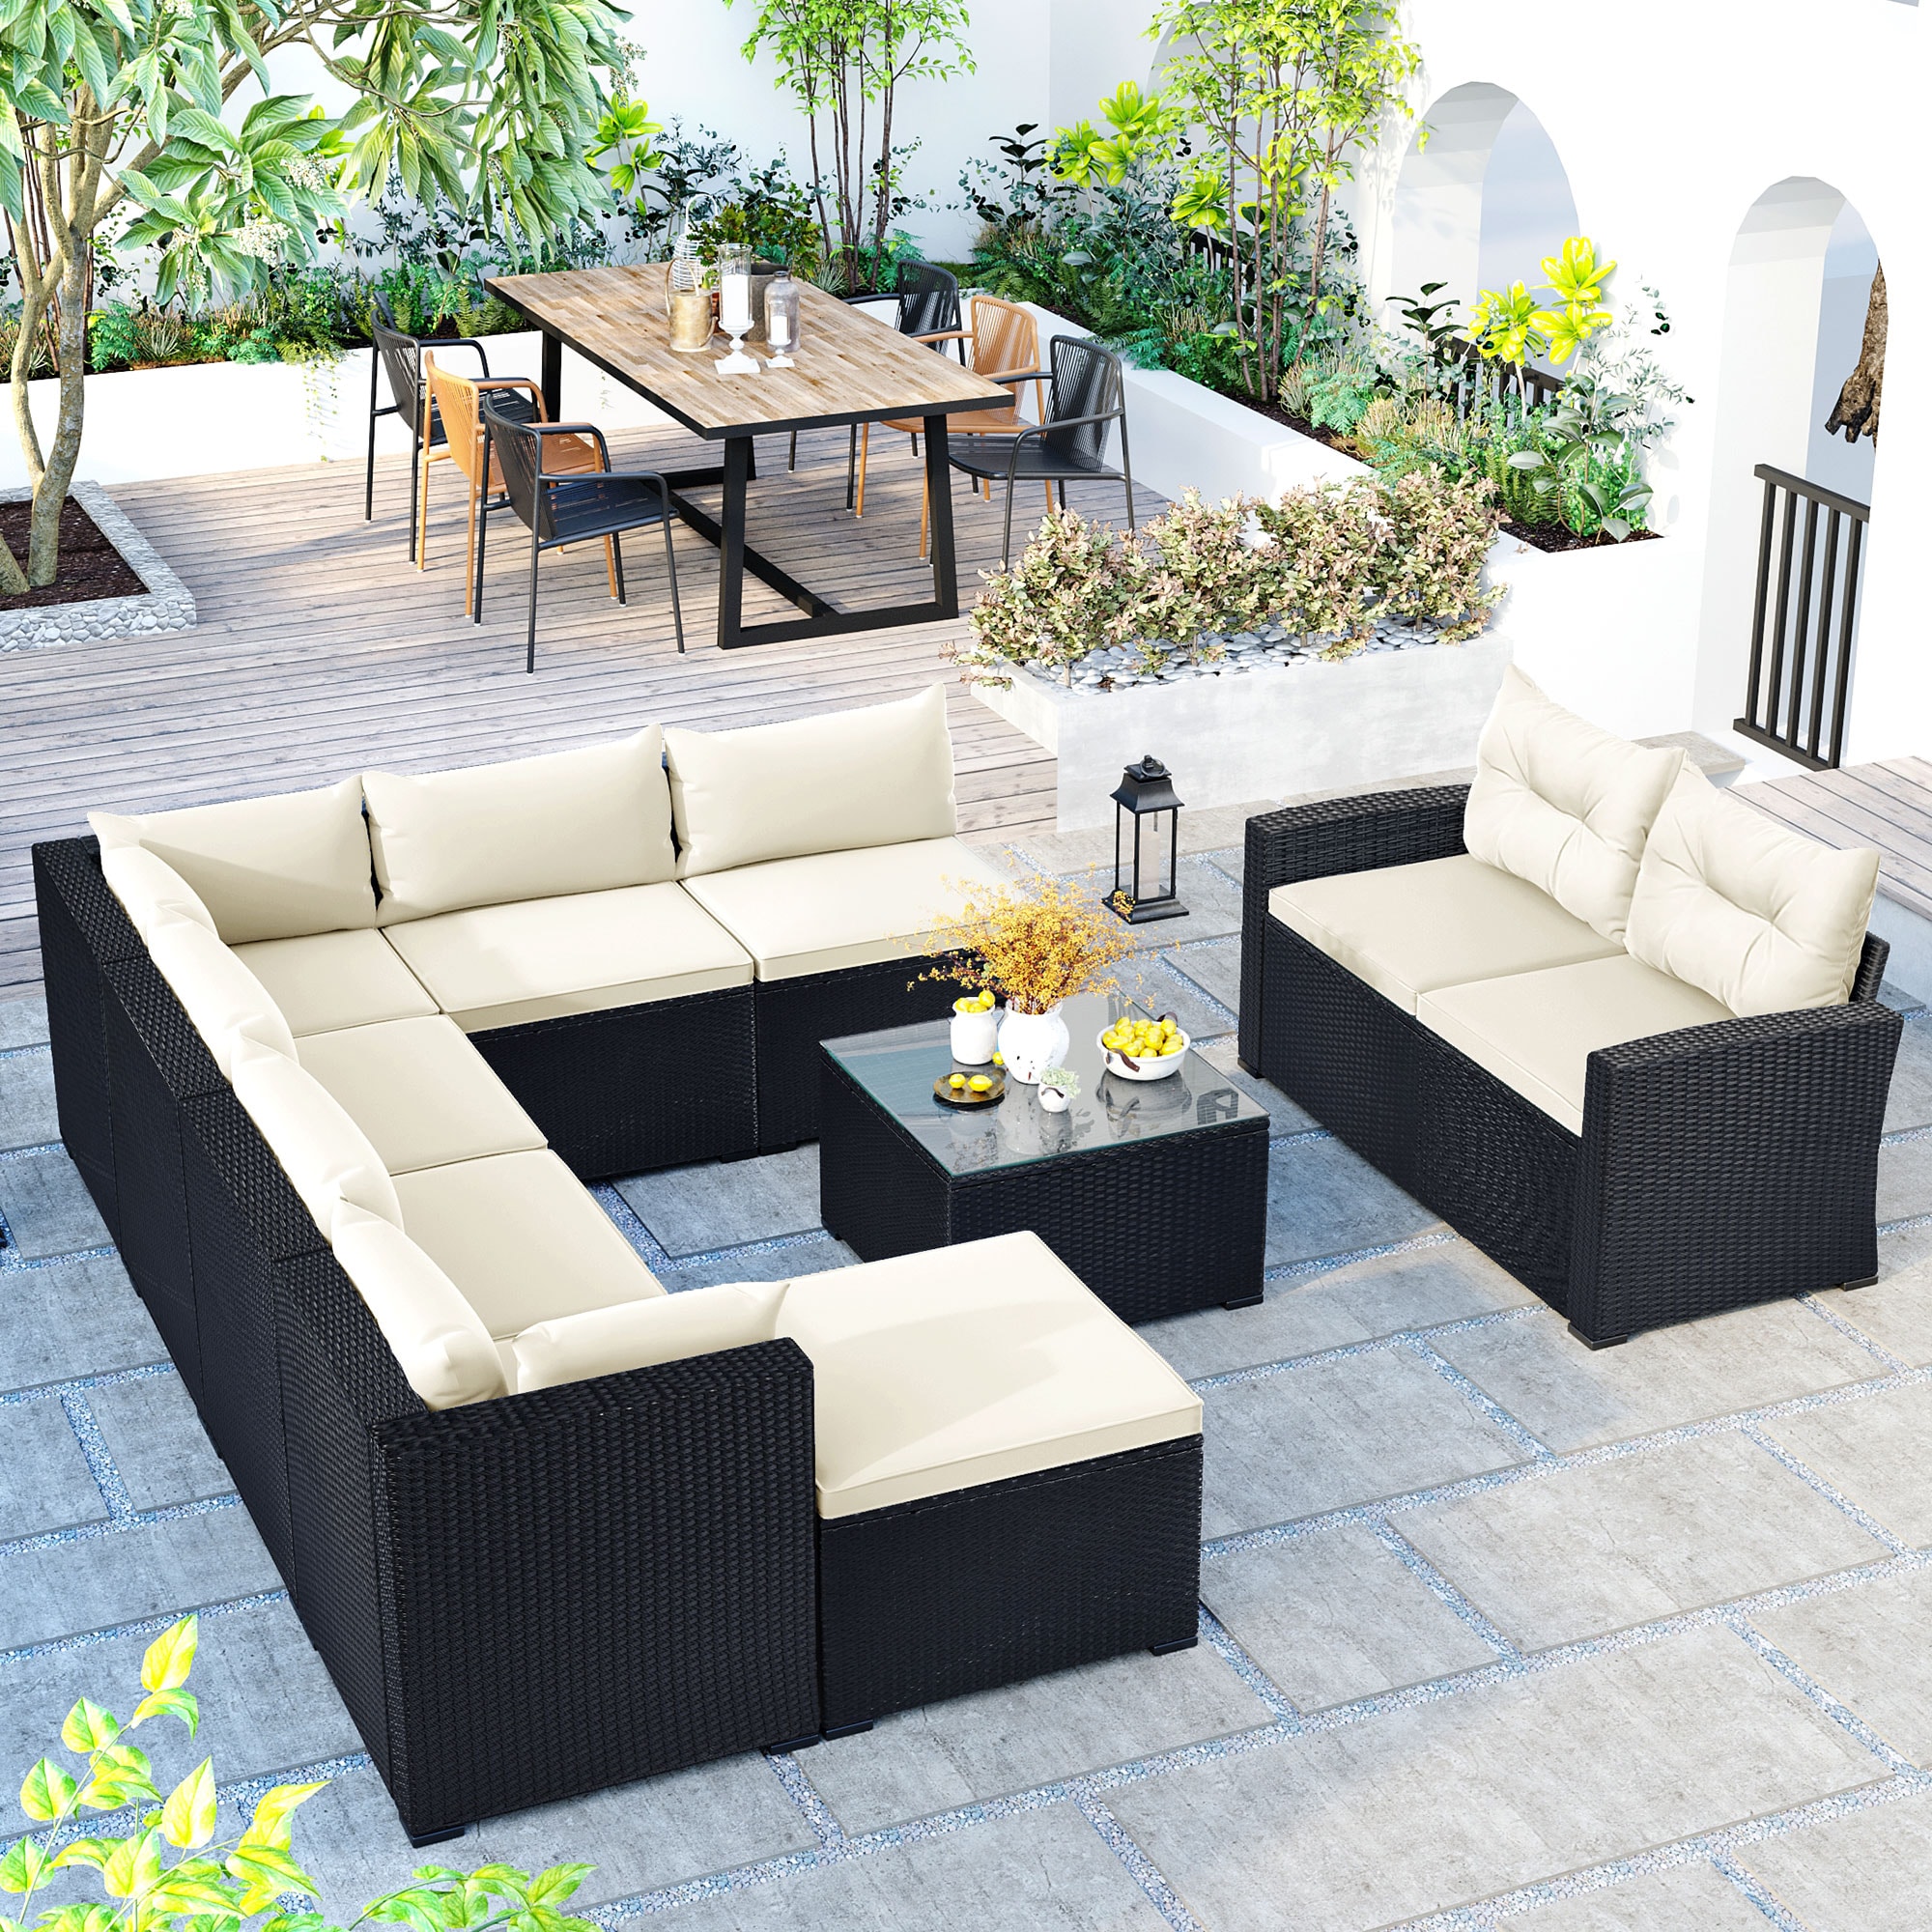 Forclover Patio Furniture at | Einzelsessel